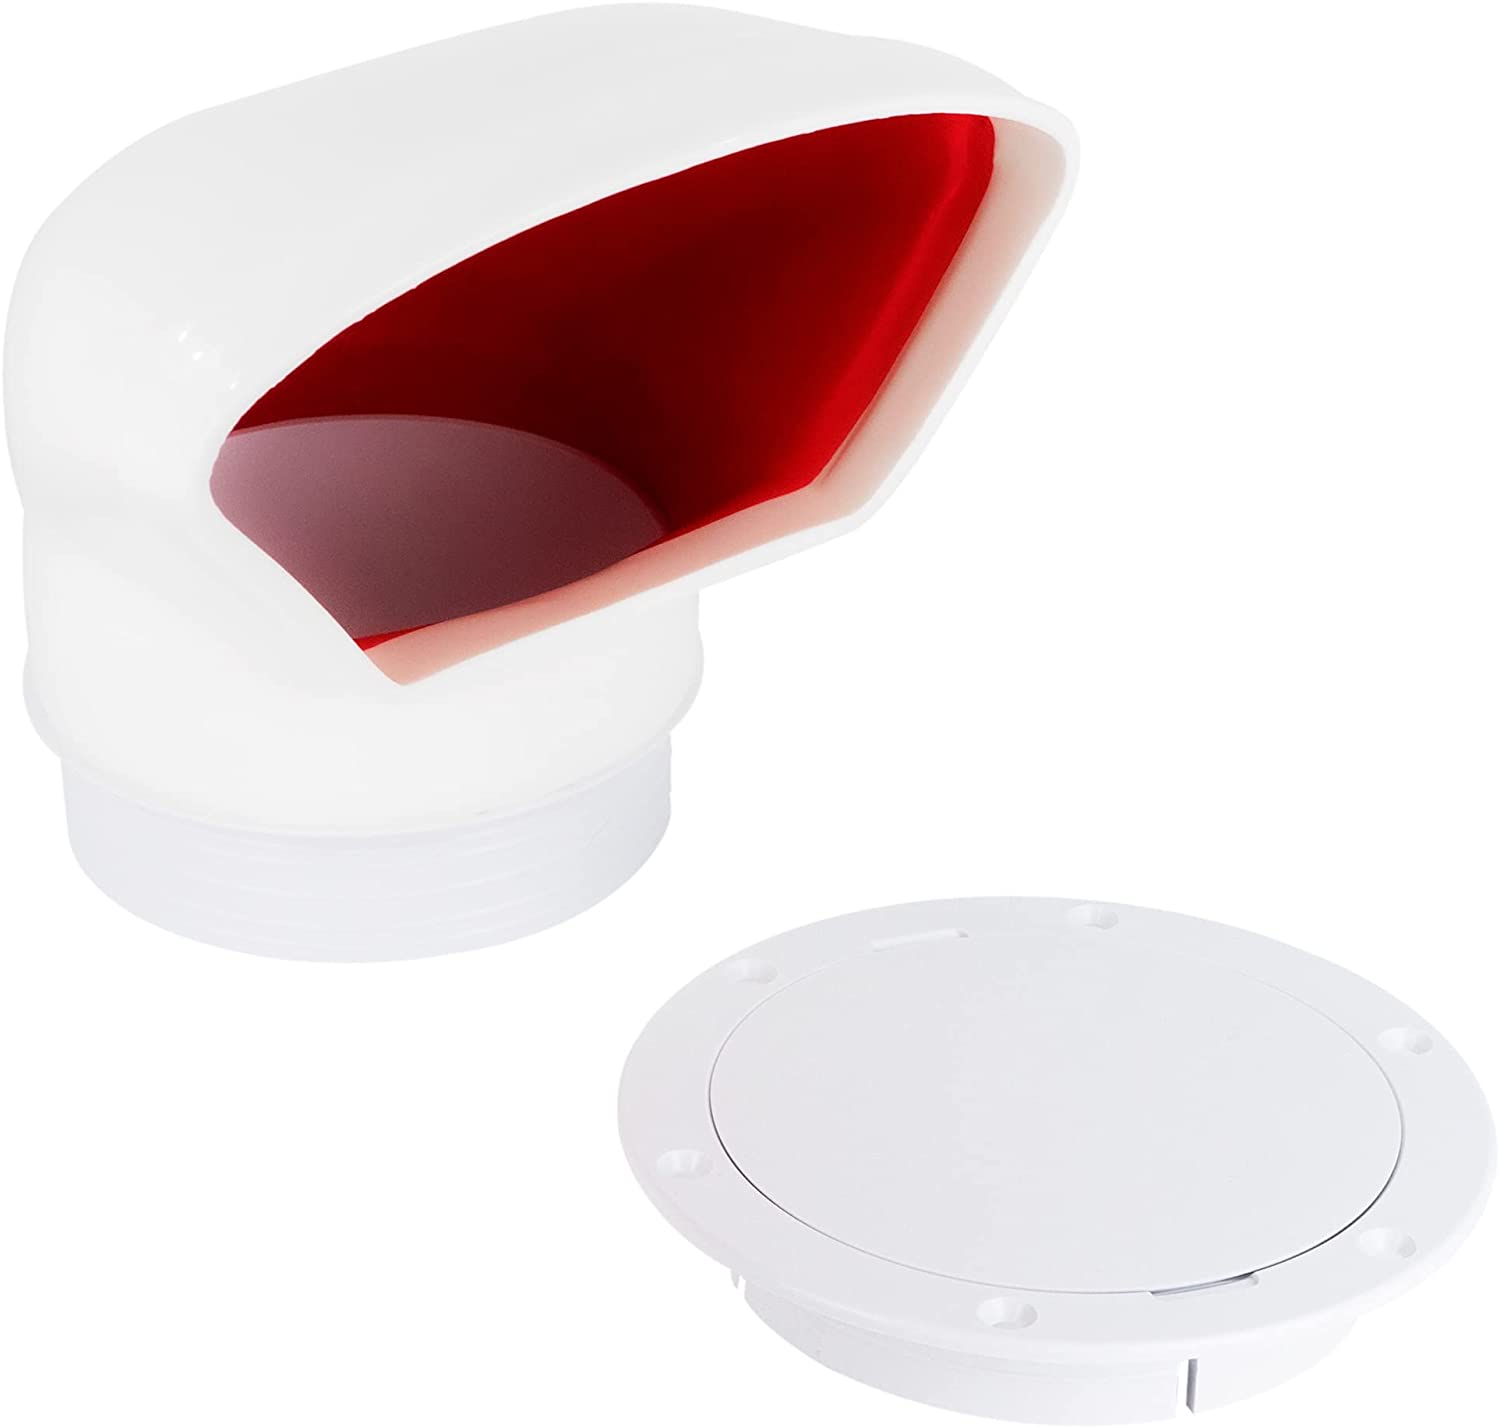 PVC Low Profile Cowl Vent with Snap-On Deck Plate, 4" inches, UV-Resistant and Flexible PVC, Interior Red, 4-1/2 inches (114 mm) Cutout-Canadian Marine &amp; Outdoor Equipment